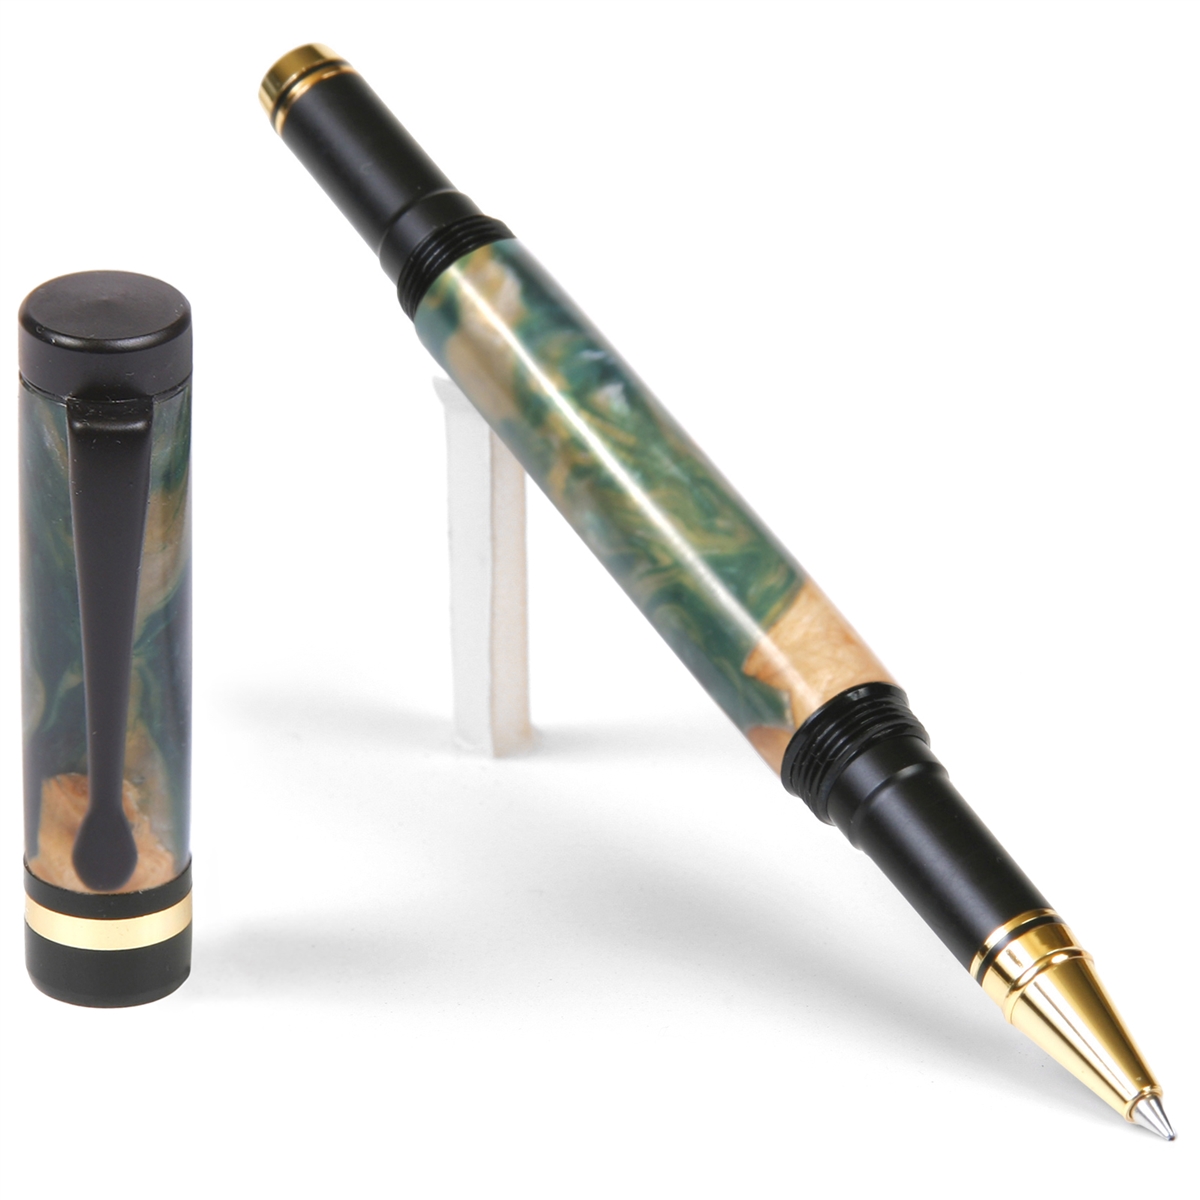 Classic Rollerball Pen - Green and Silver Burl End Cap